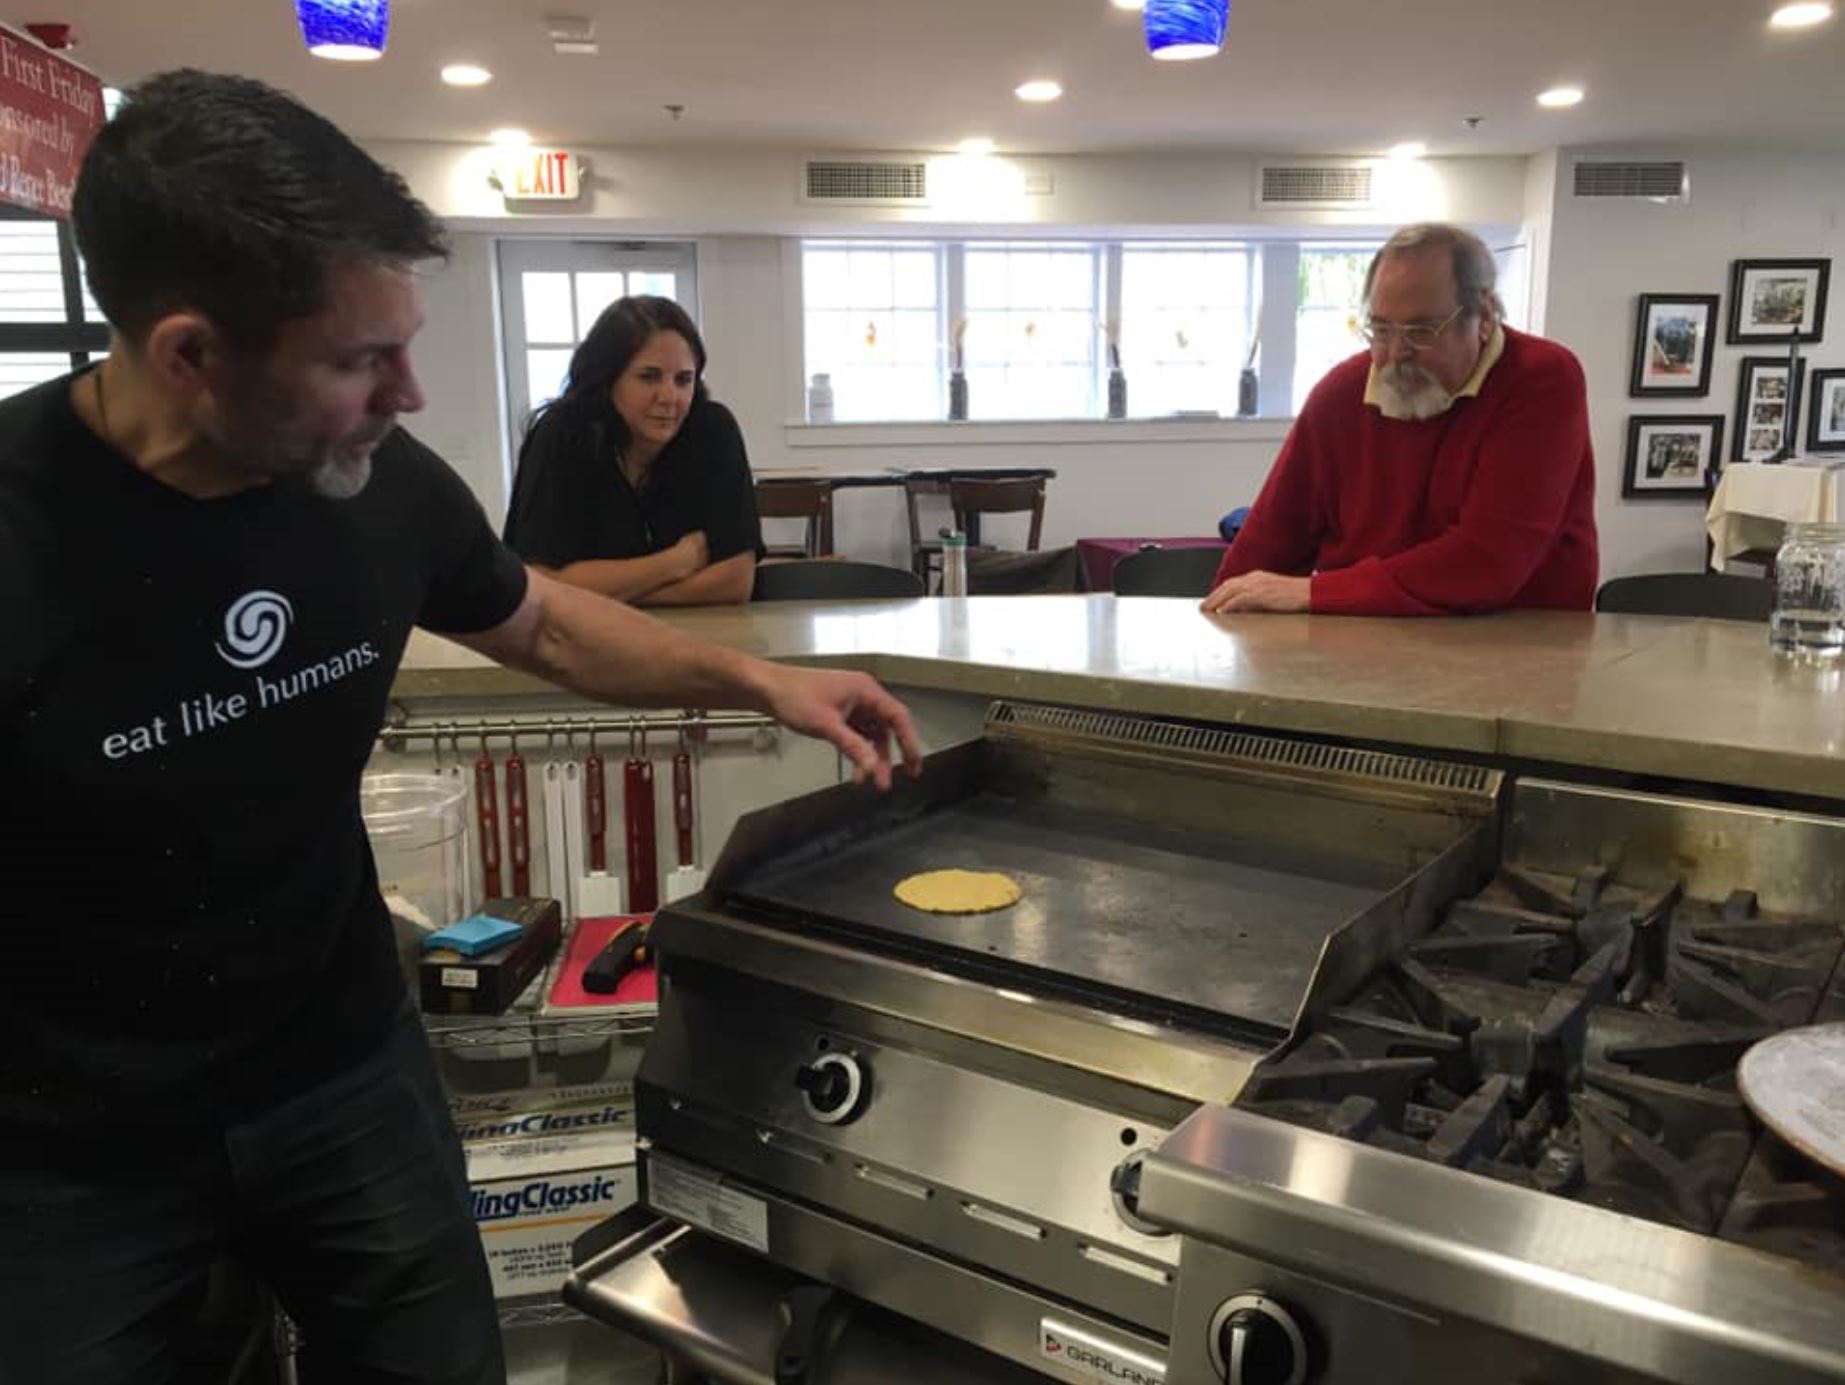 Dr. Bill Schindler of the Eastern Shore Food Lab demostrates how to make tortillas from nixtamalized maize.